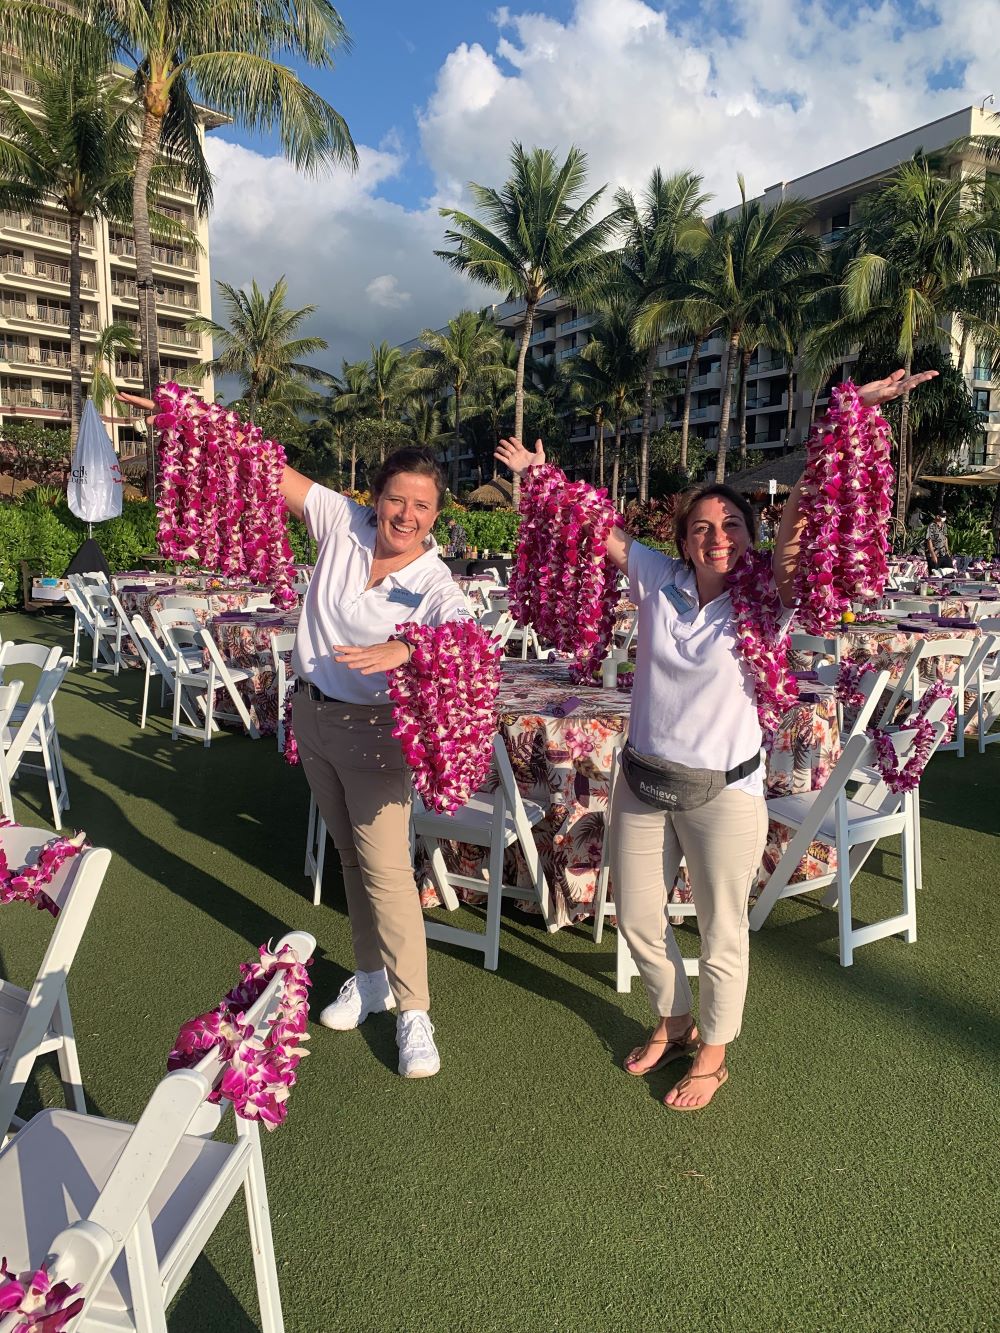 Prepping a special luau event in Maui by greeting guests with a “makana” (which means gift in Hawaiian) of leis (with event planner Laura Hammarstrom)